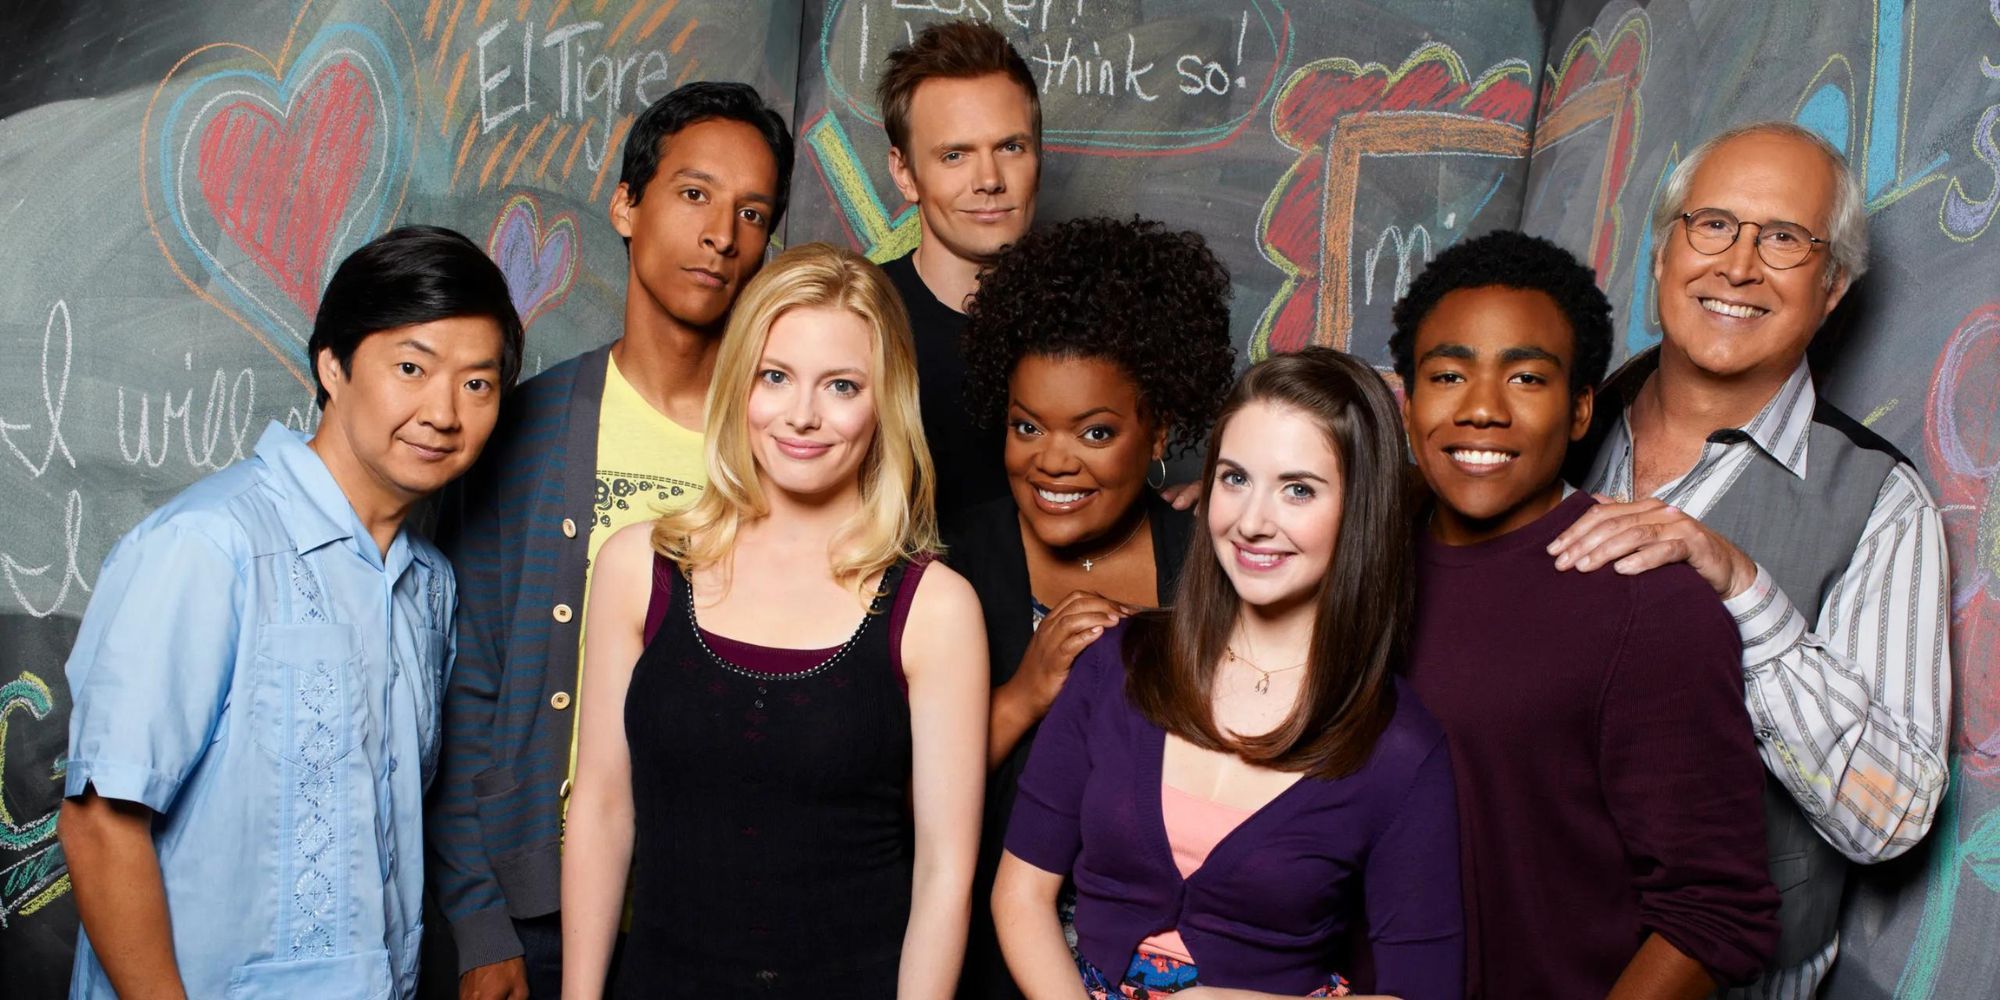 The cast of Community standing together